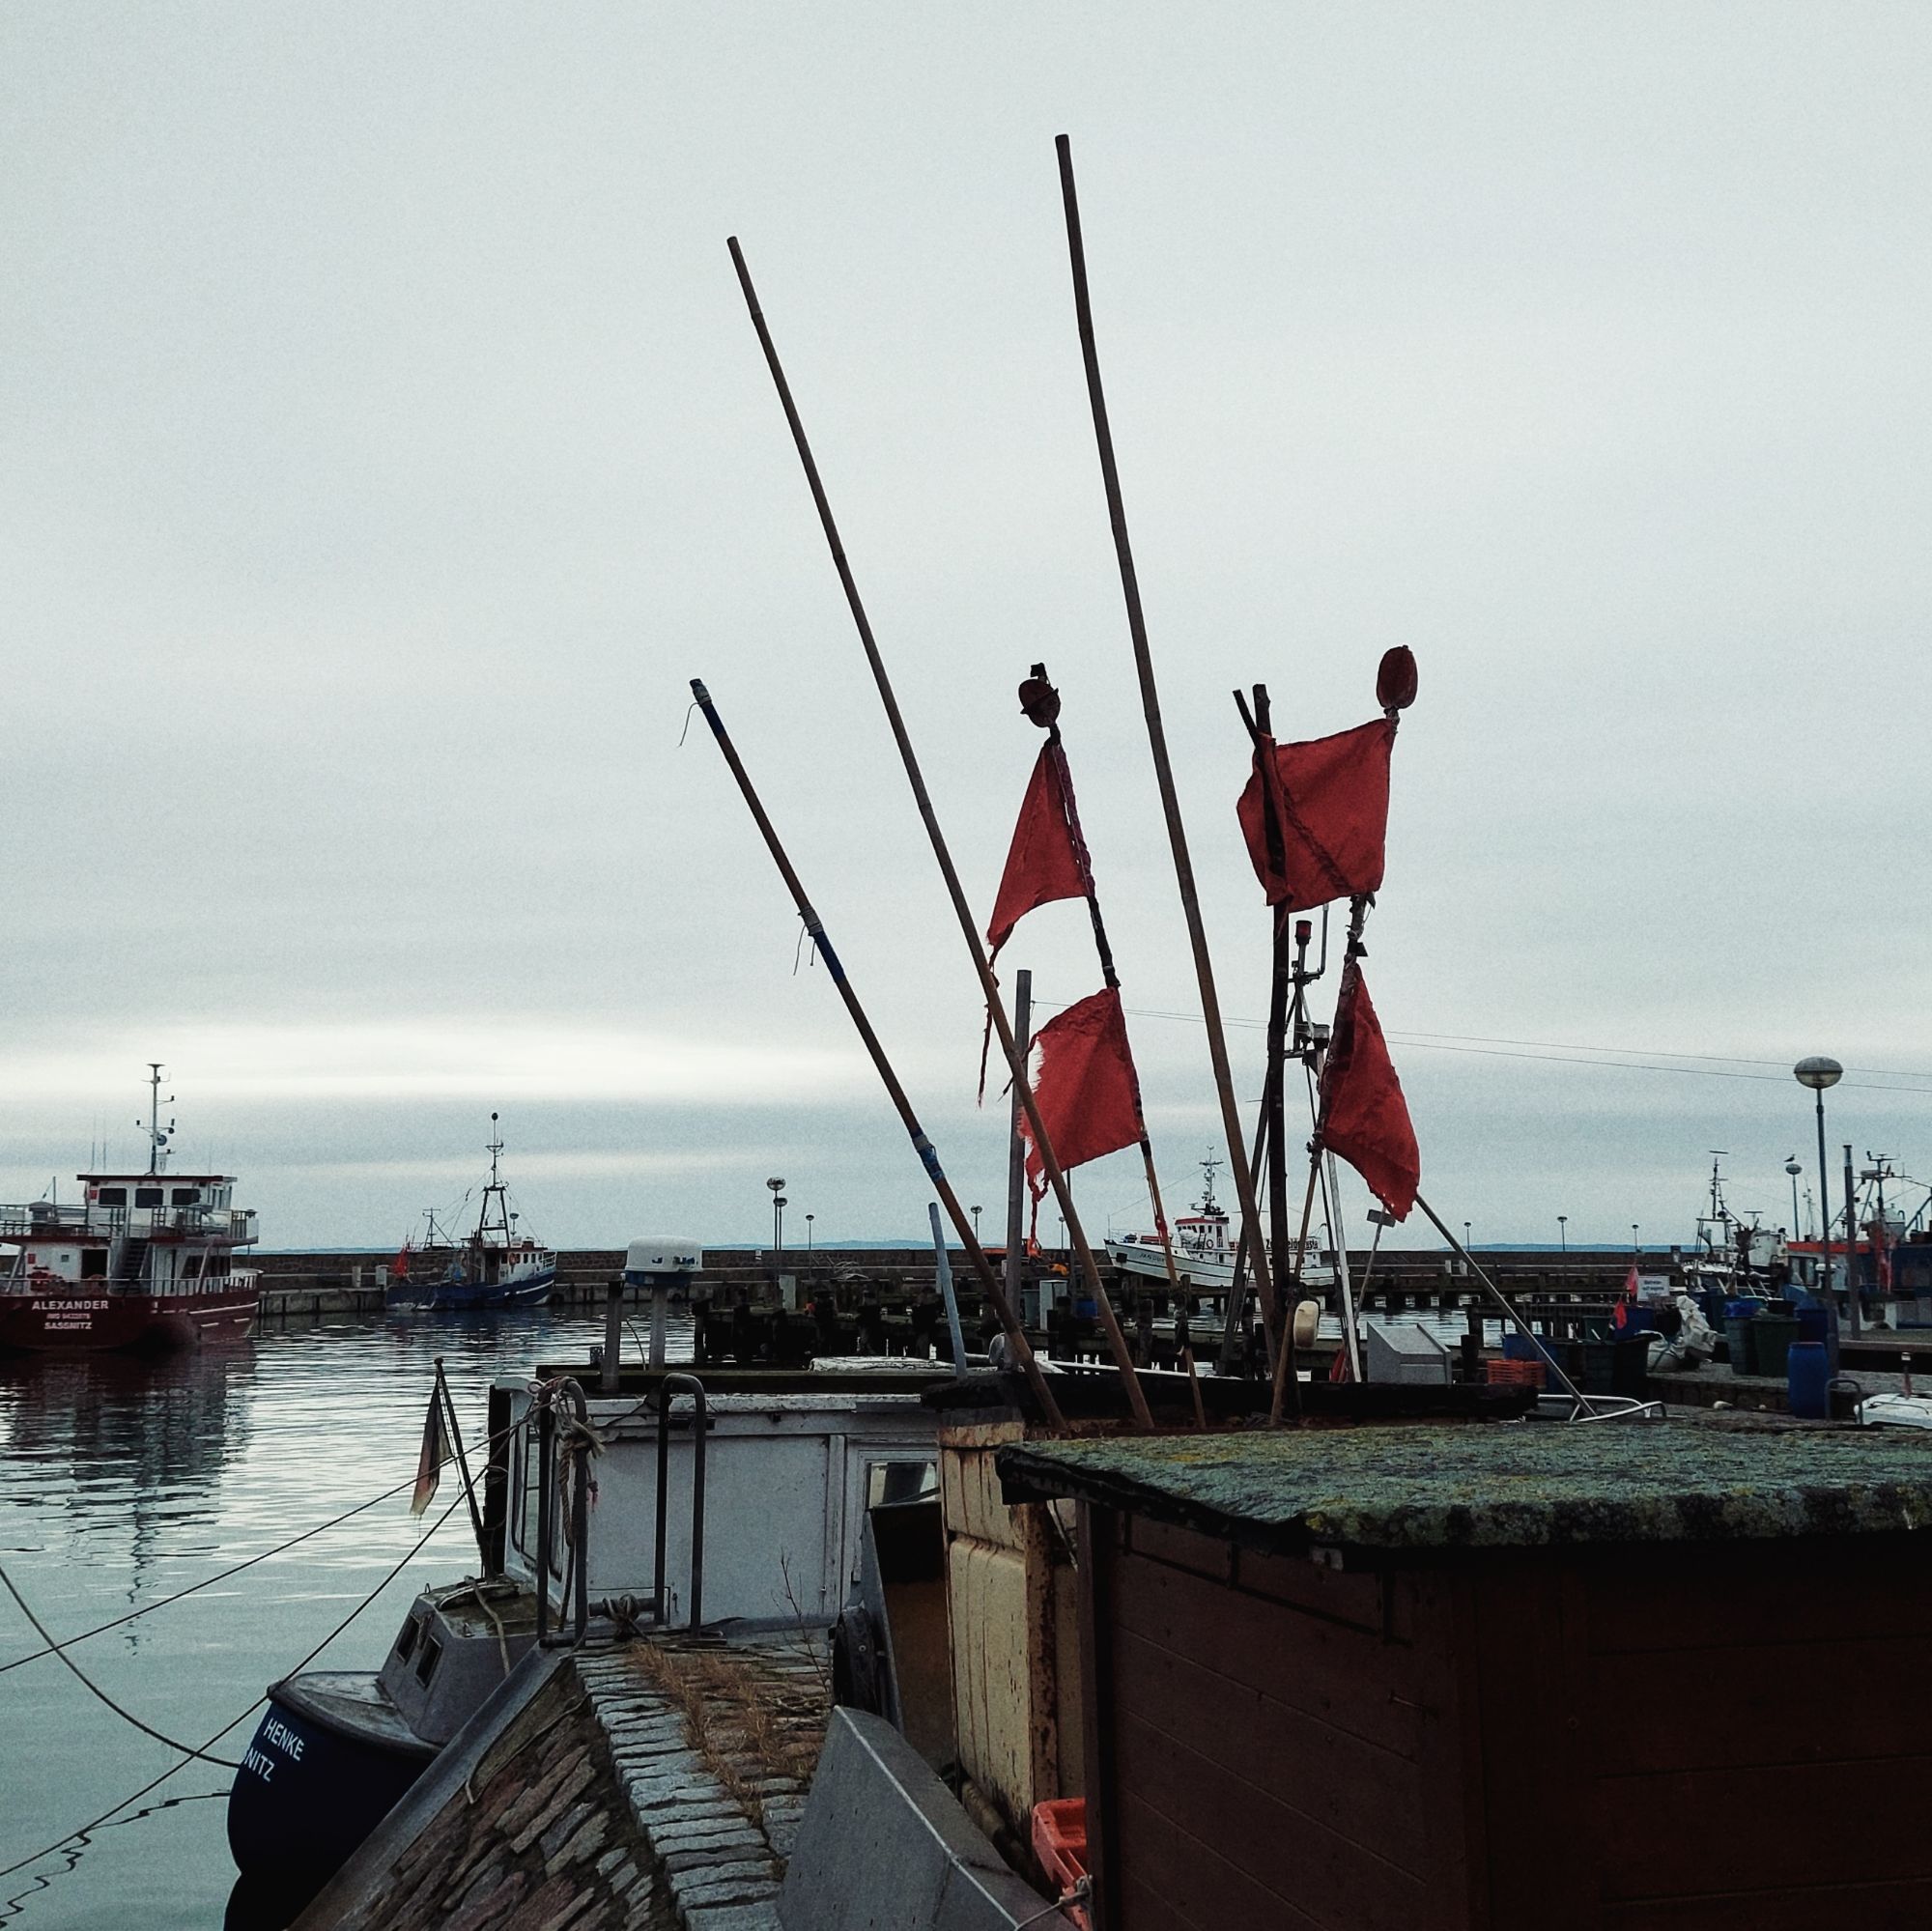 Red flags kept in an old equipment box, in front of the harbour and the sea.